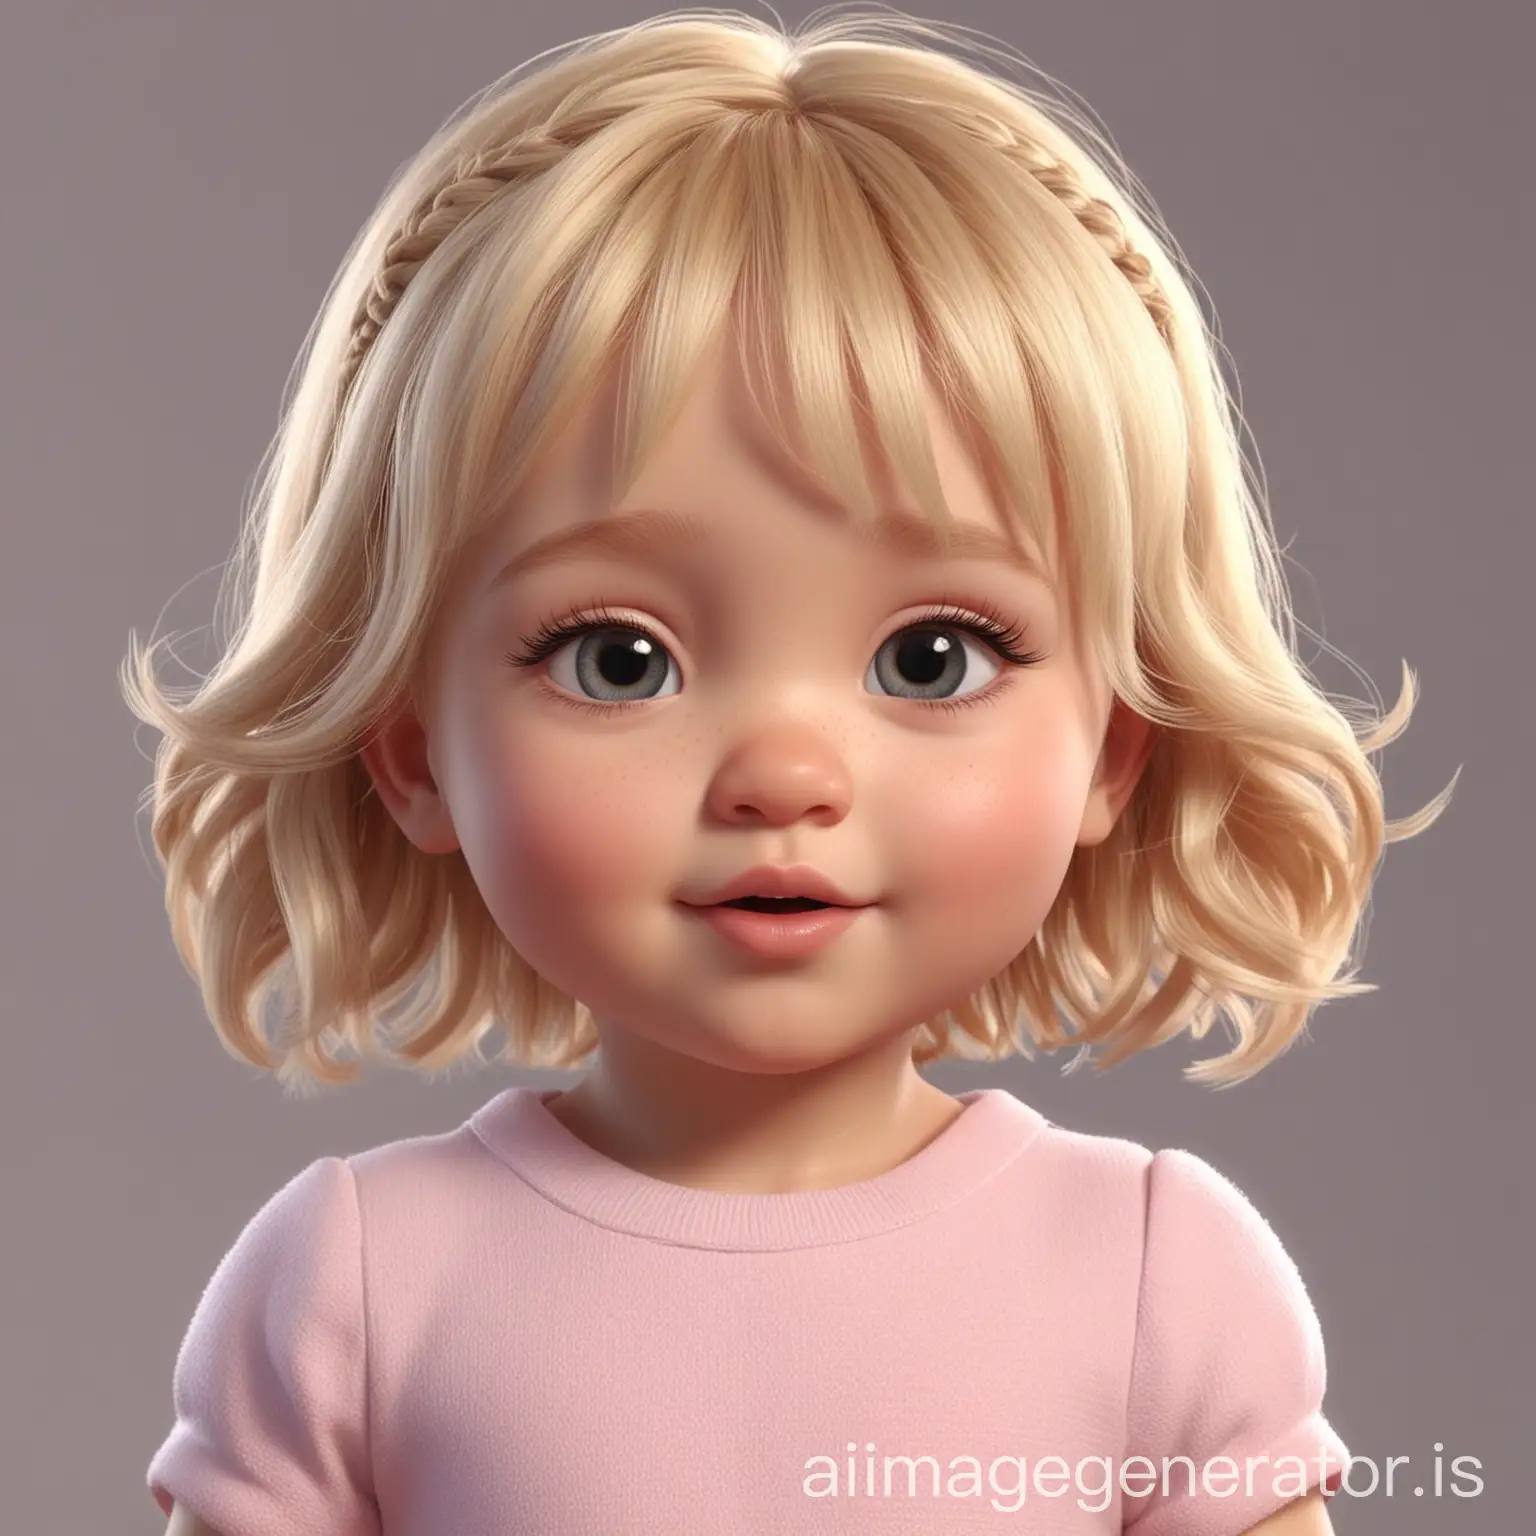 Adorable-Blonde-Baby-Girl-with-Playful-Hairstyle-3D-Animation